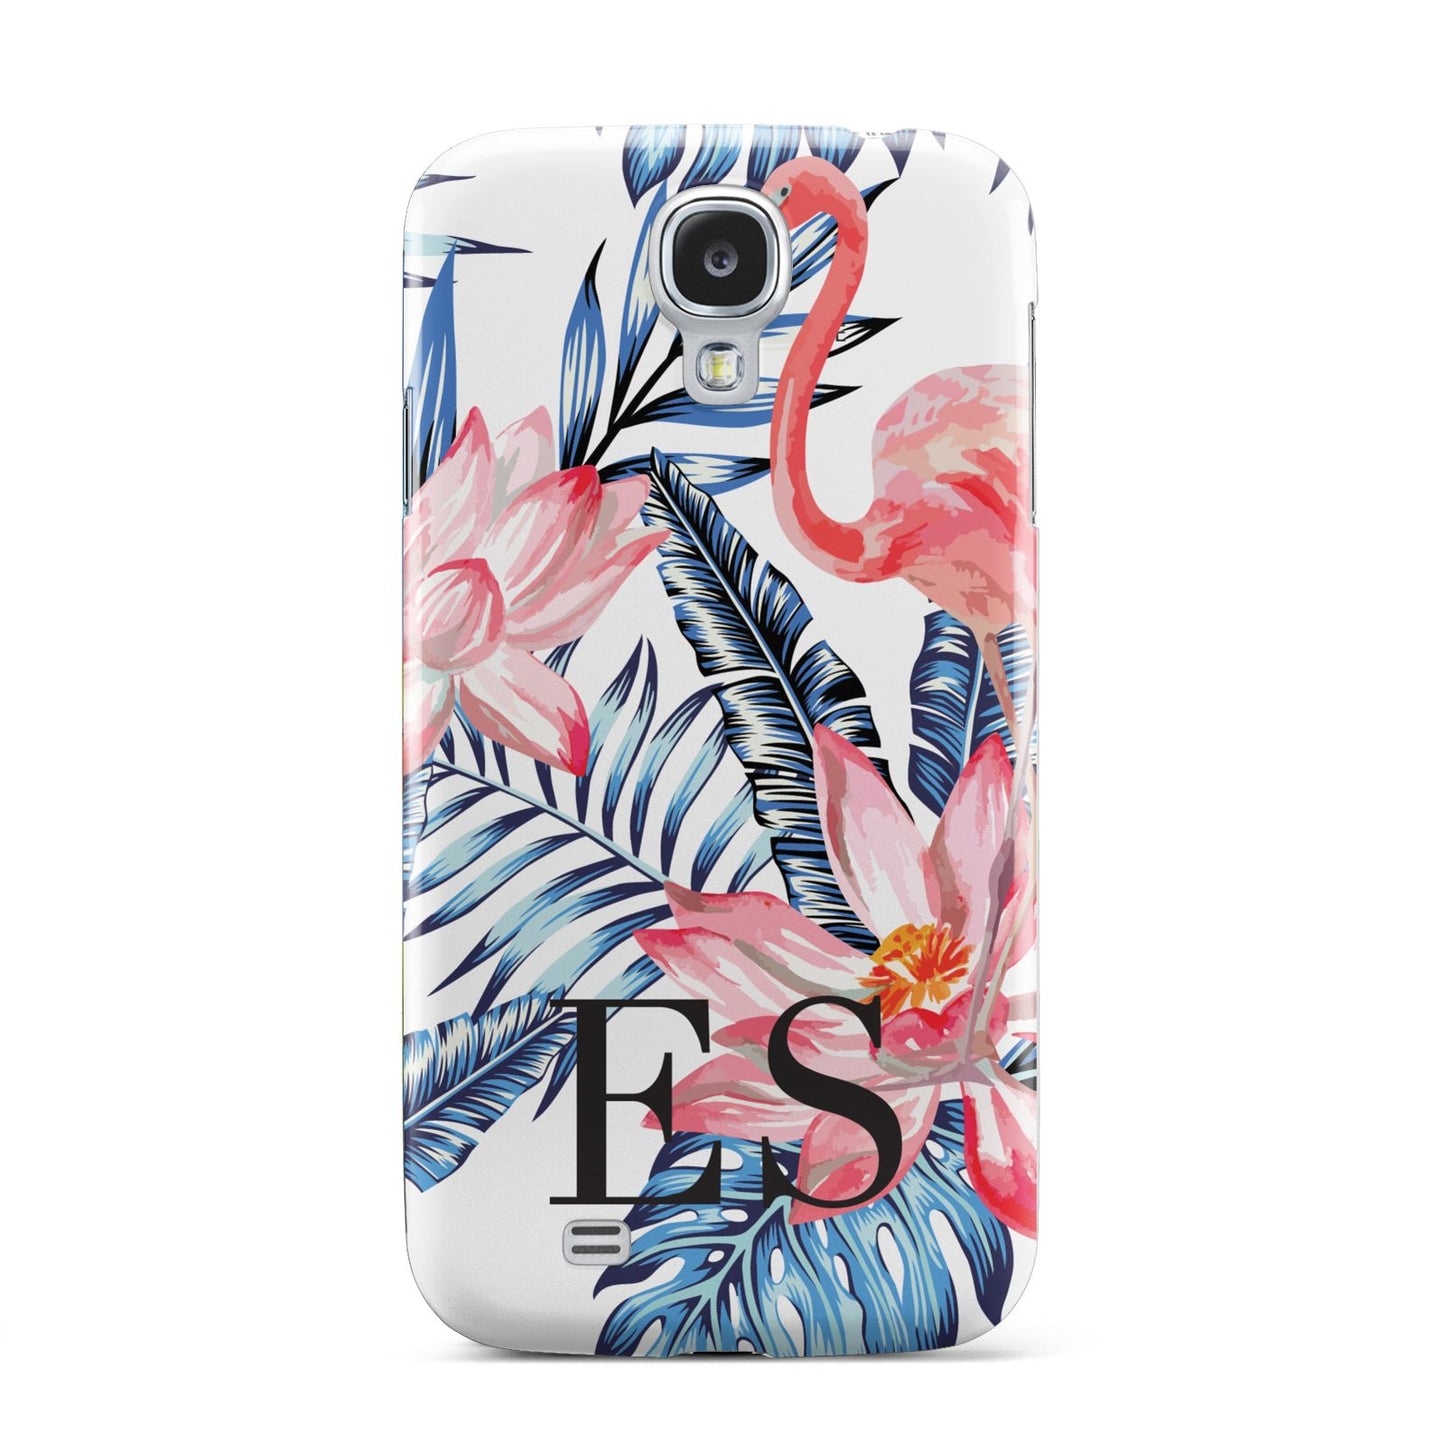 Blue Leaves Pink Flamingos Samsung Galaxy S4 Case